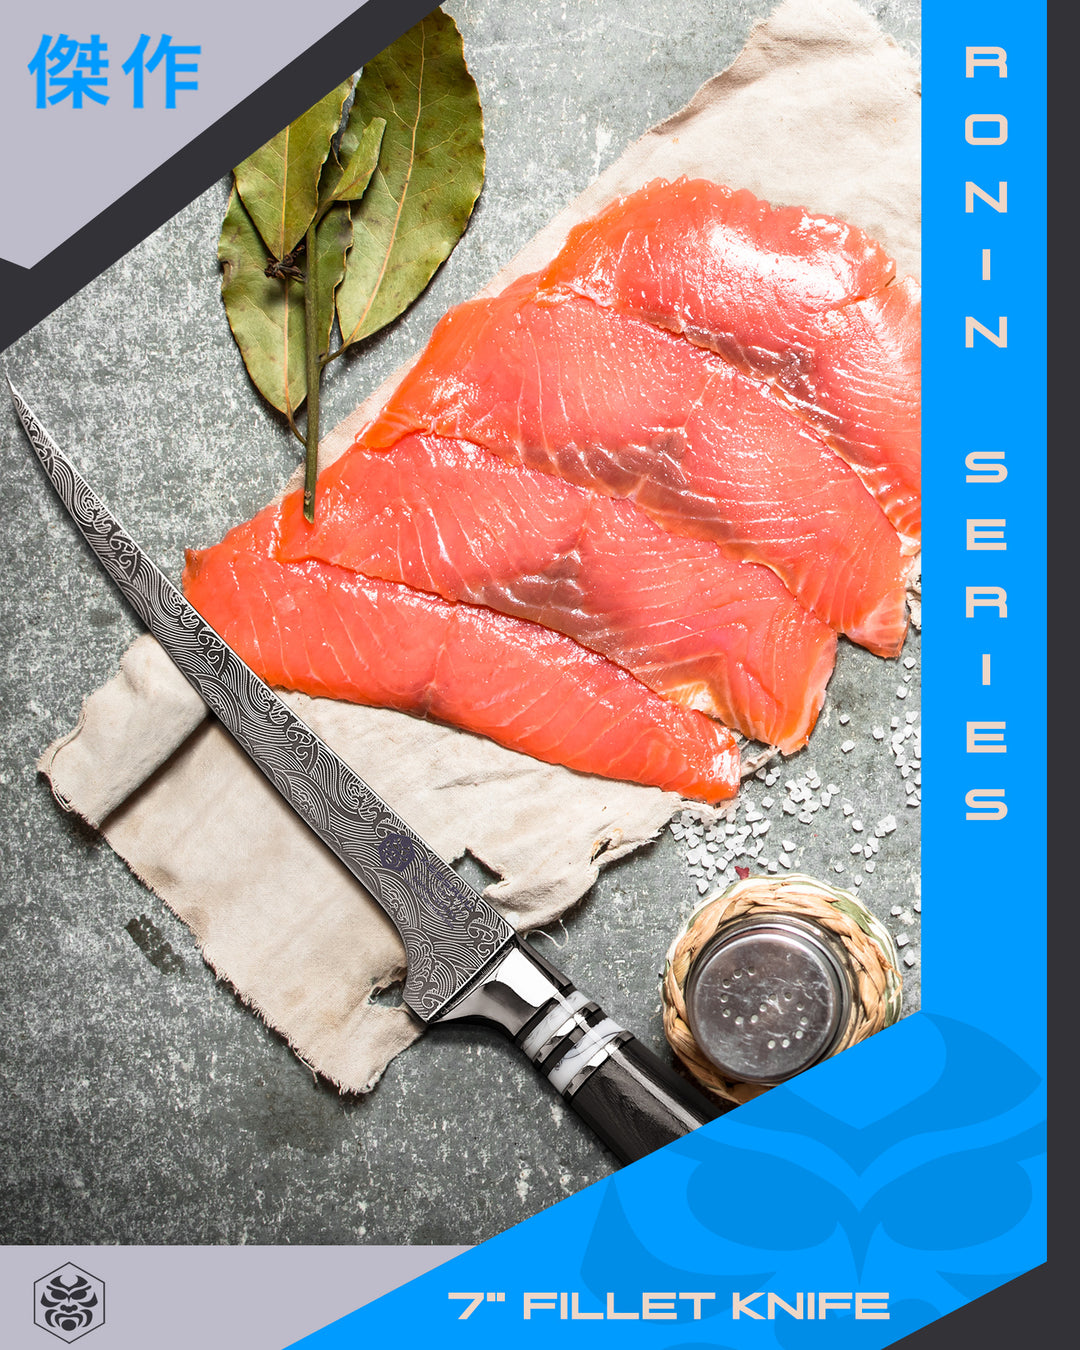 The Ronin FIllet knife with very thin slices of fish, and seasoning